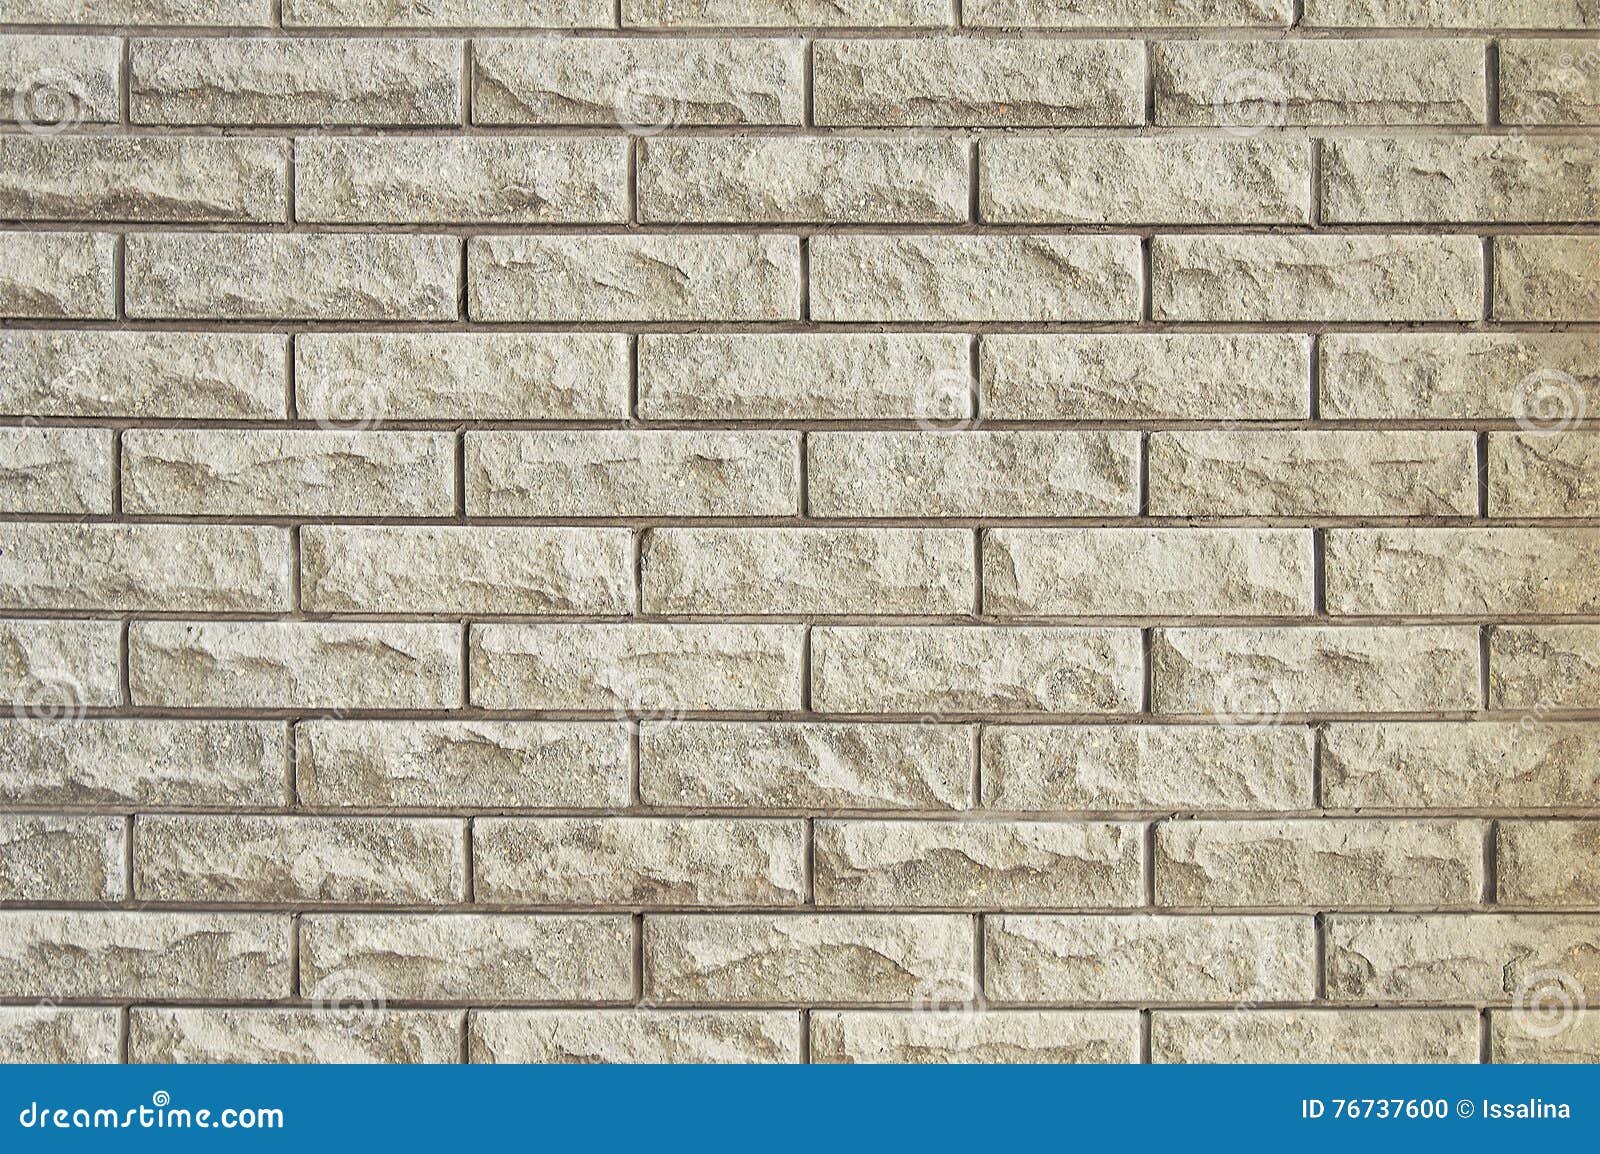 Old Beige  Brick  Wall  Background Texture  Stock Photo 